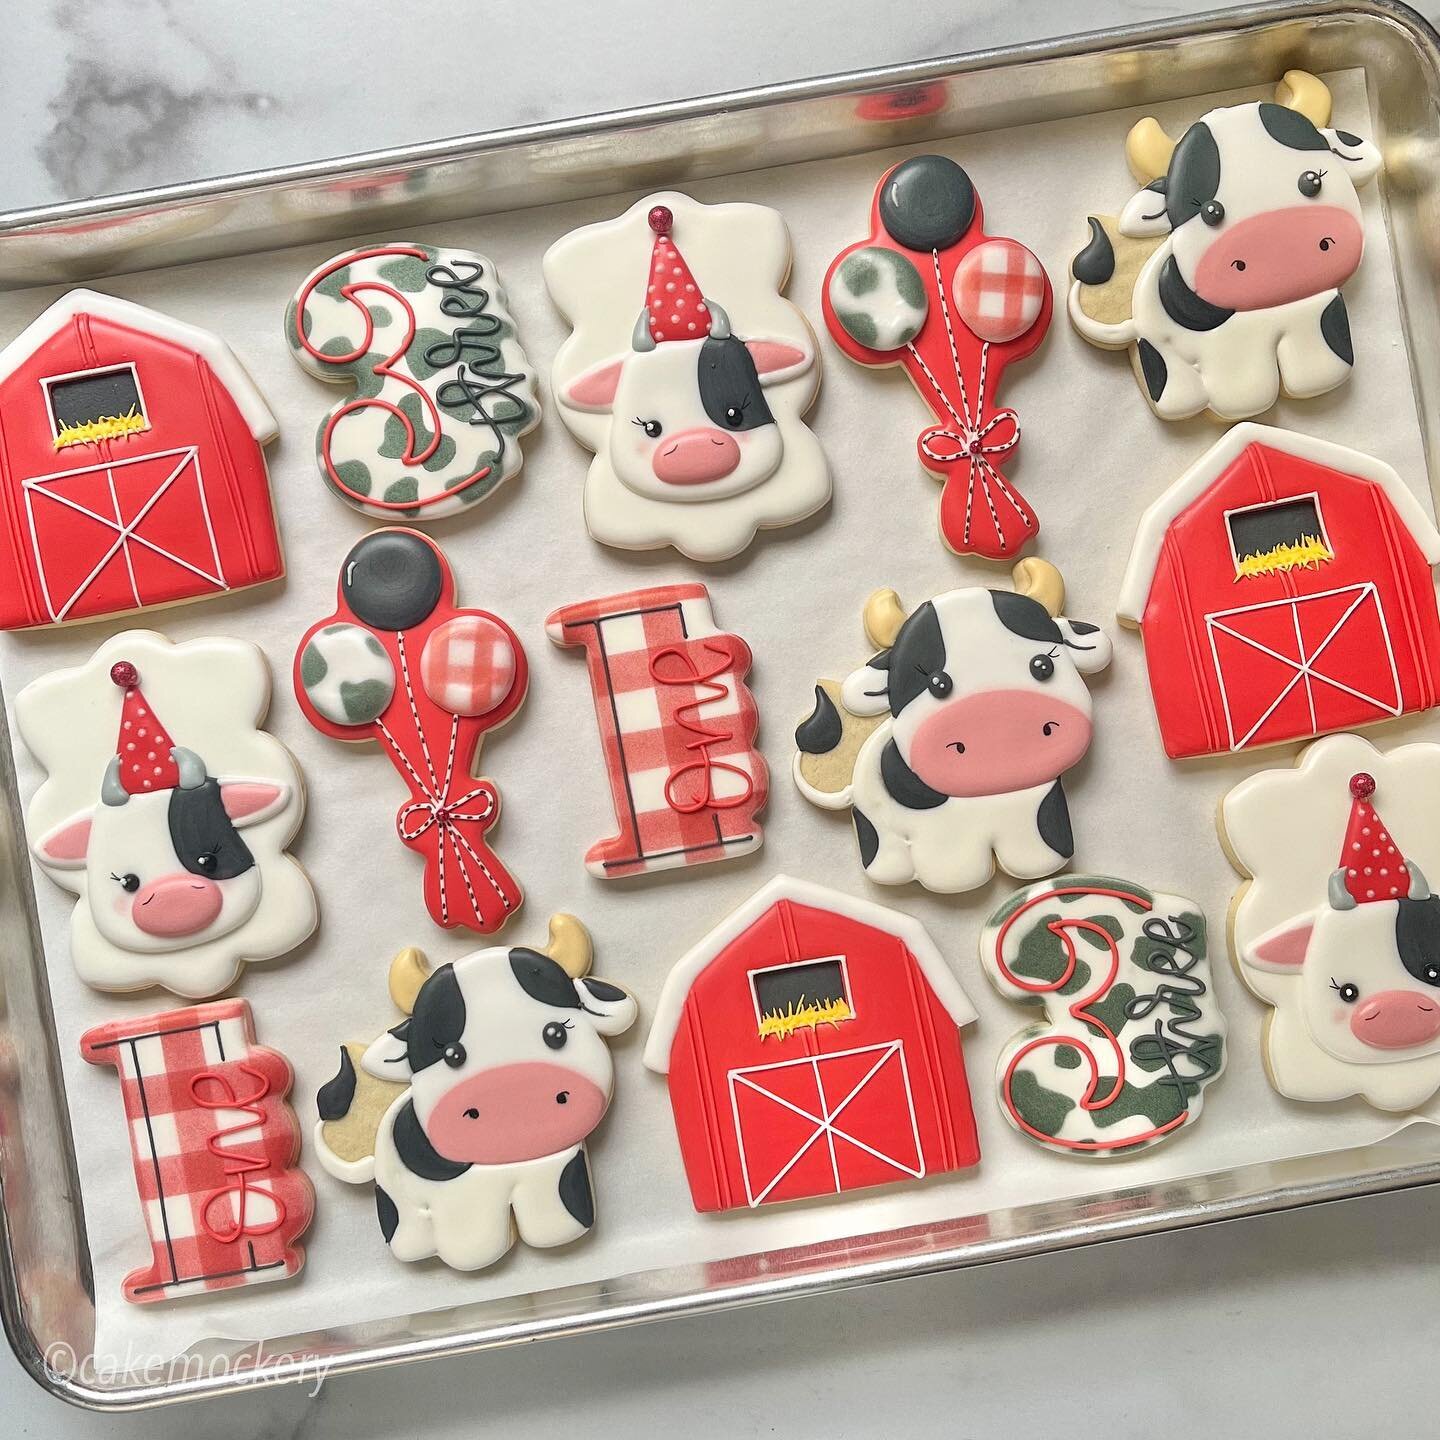 Holy cow!  These sisters are mooooovin&rsquo; on up in the years!  Lol!  What&rsquo;s black, white and red all over?  An embarrassed 🐄😂&hellip;. Okay, I&rsquo;m done&hellip; Can we agree that cow cookies are some of the cutest animal cookies out th